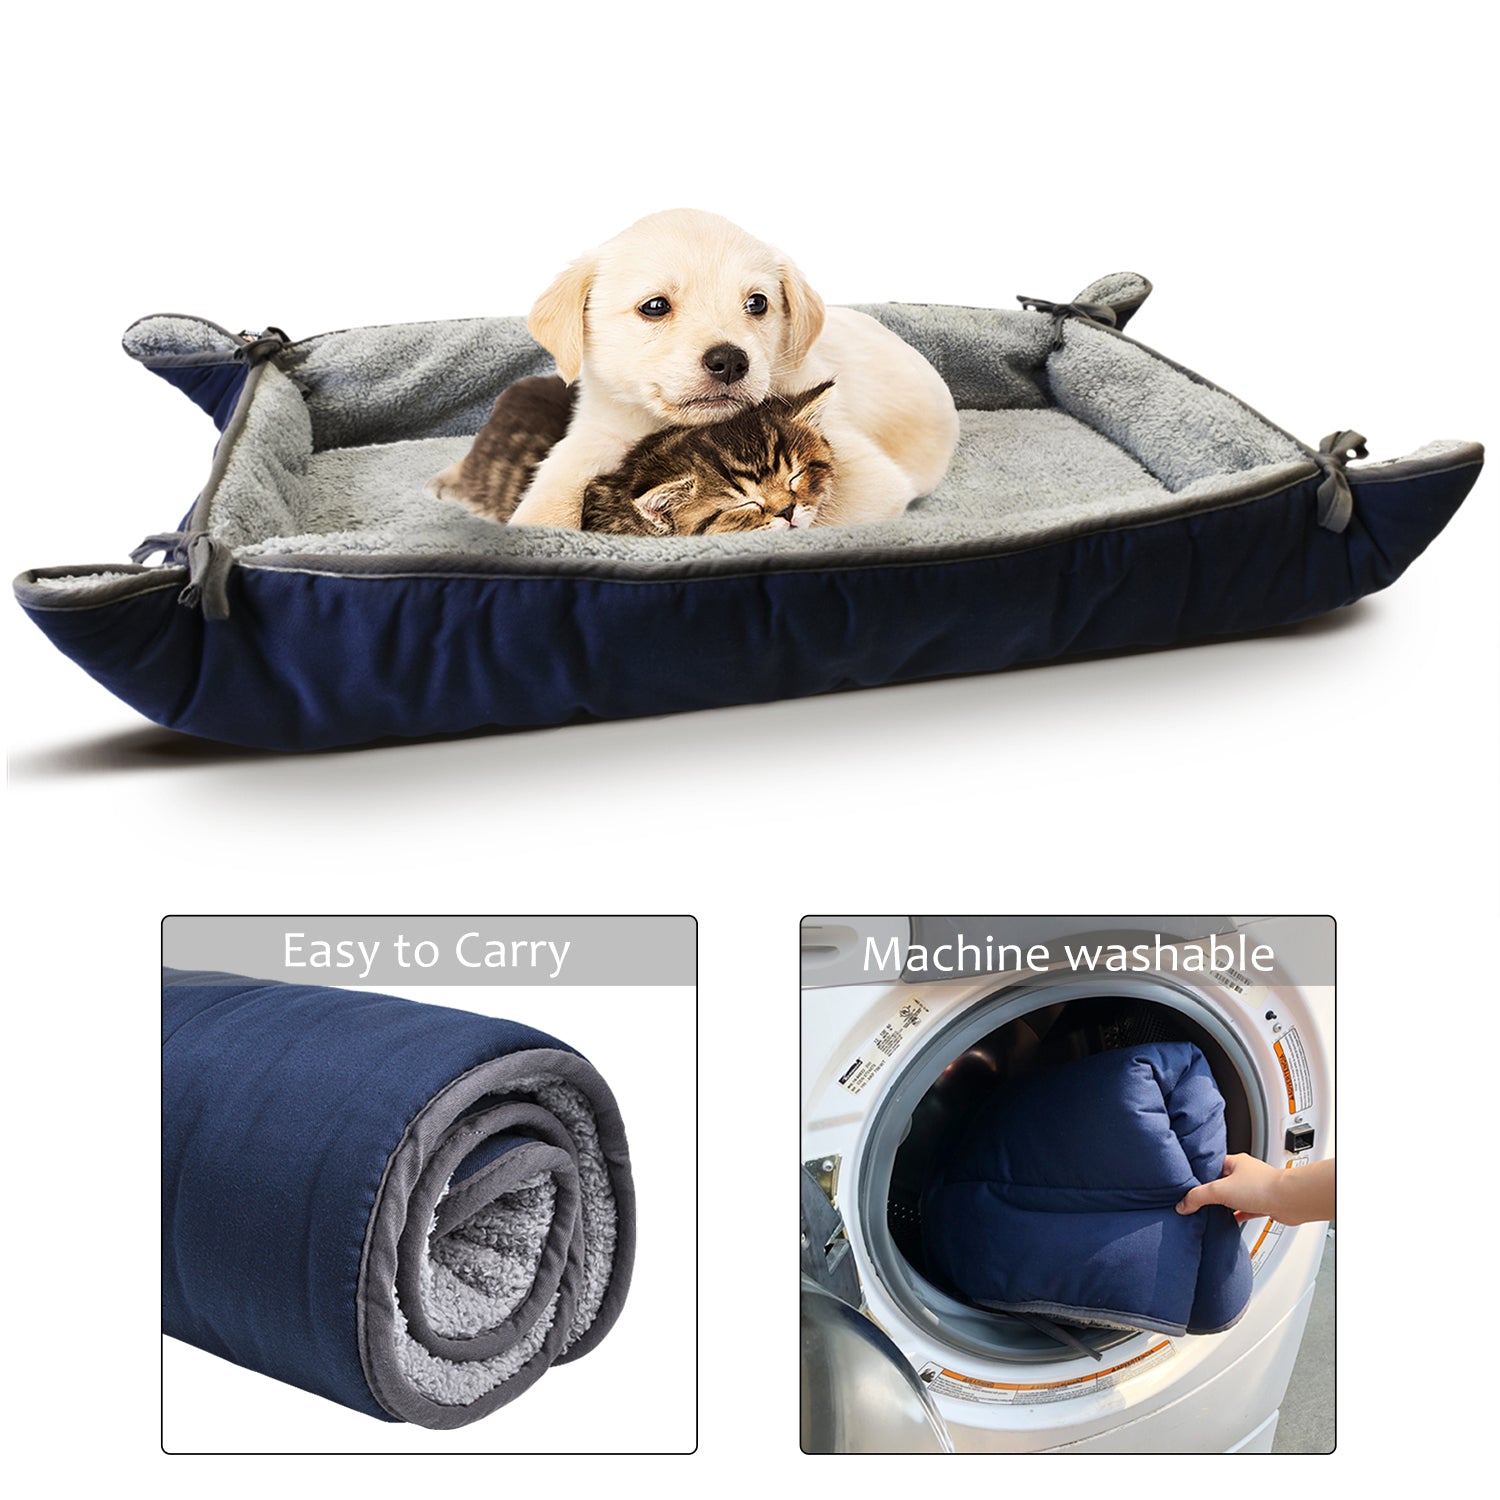 Pawsse Dog Cuddler Bed,Soft Plush Pet Sofa Thick Kennel Cushion Pad Crate Mat Blanket Car Seat Cover for Small Medium Large Dogs Puppy Cats Blue